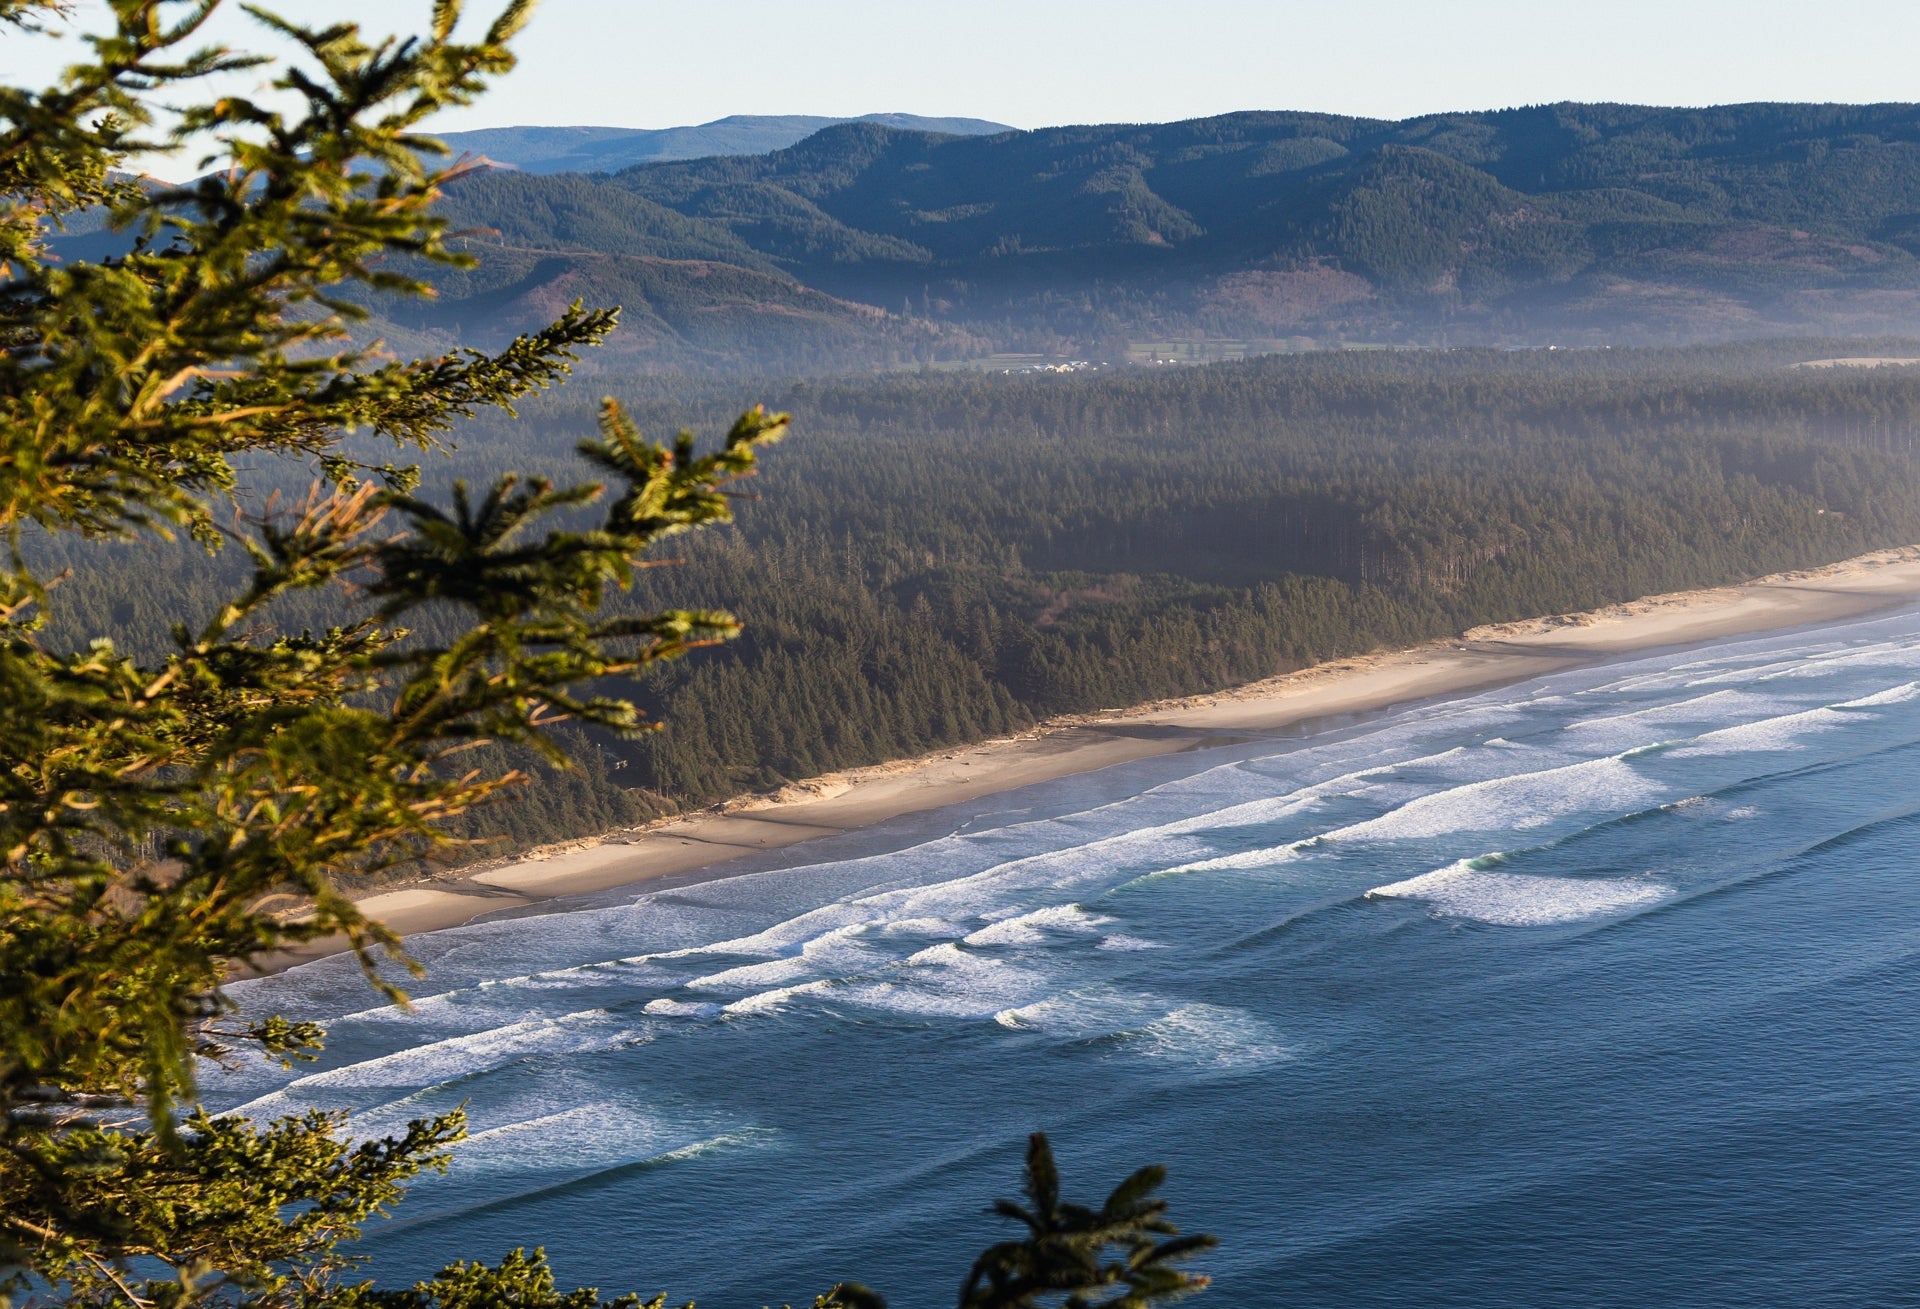 Cape Lookout State Park